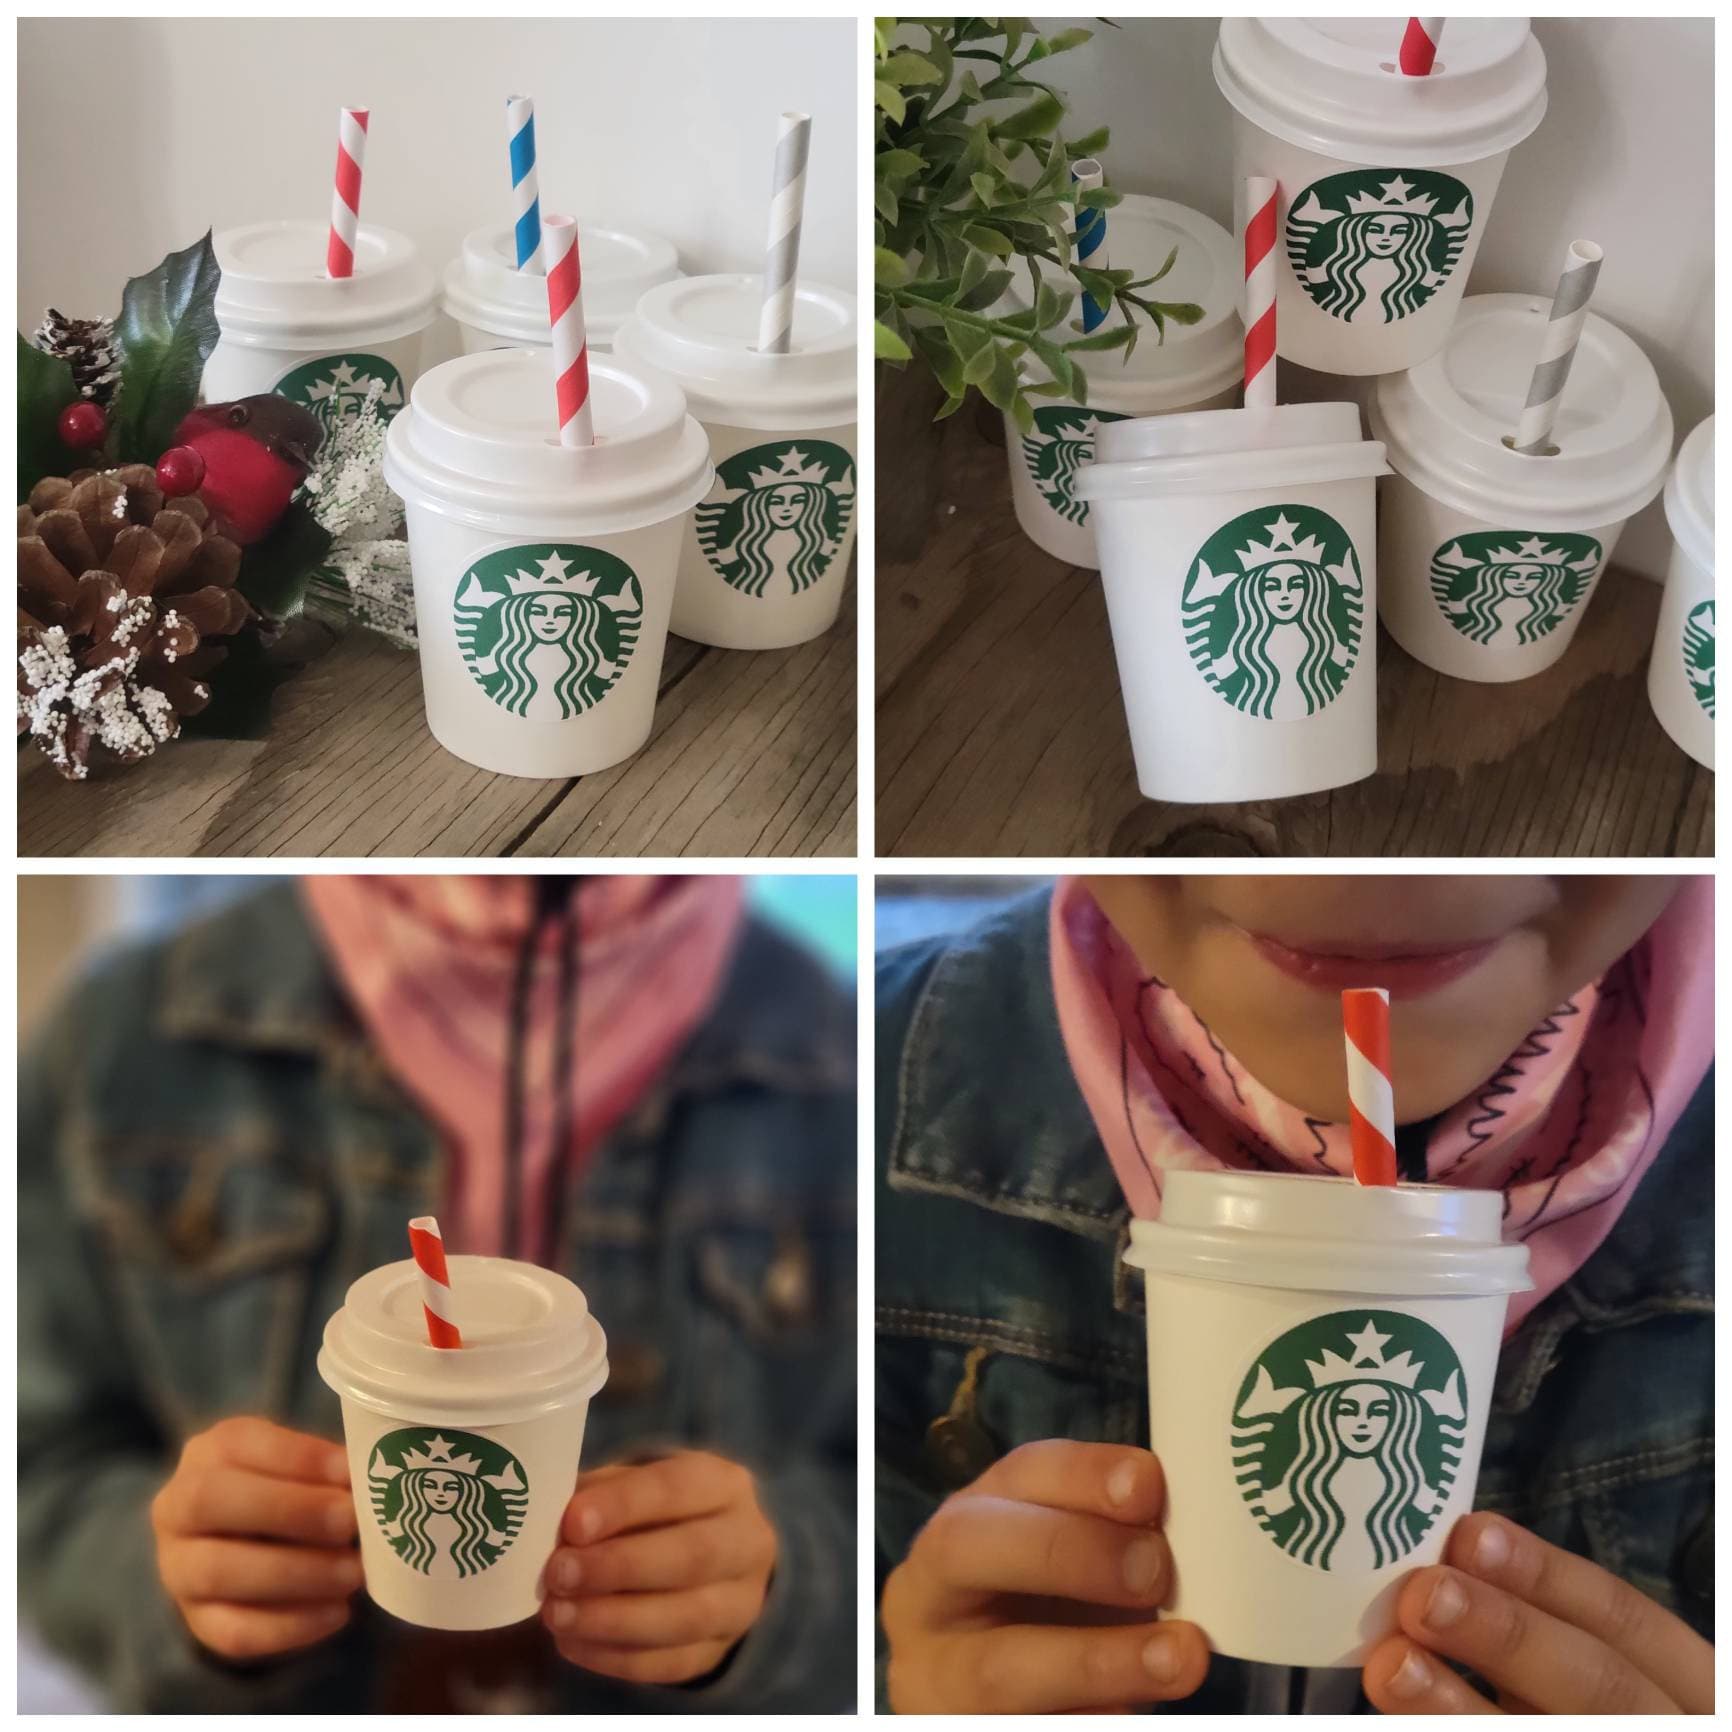 Mini Starbucks Cups -   Starbucks cups, Starbucks party, Coffee party